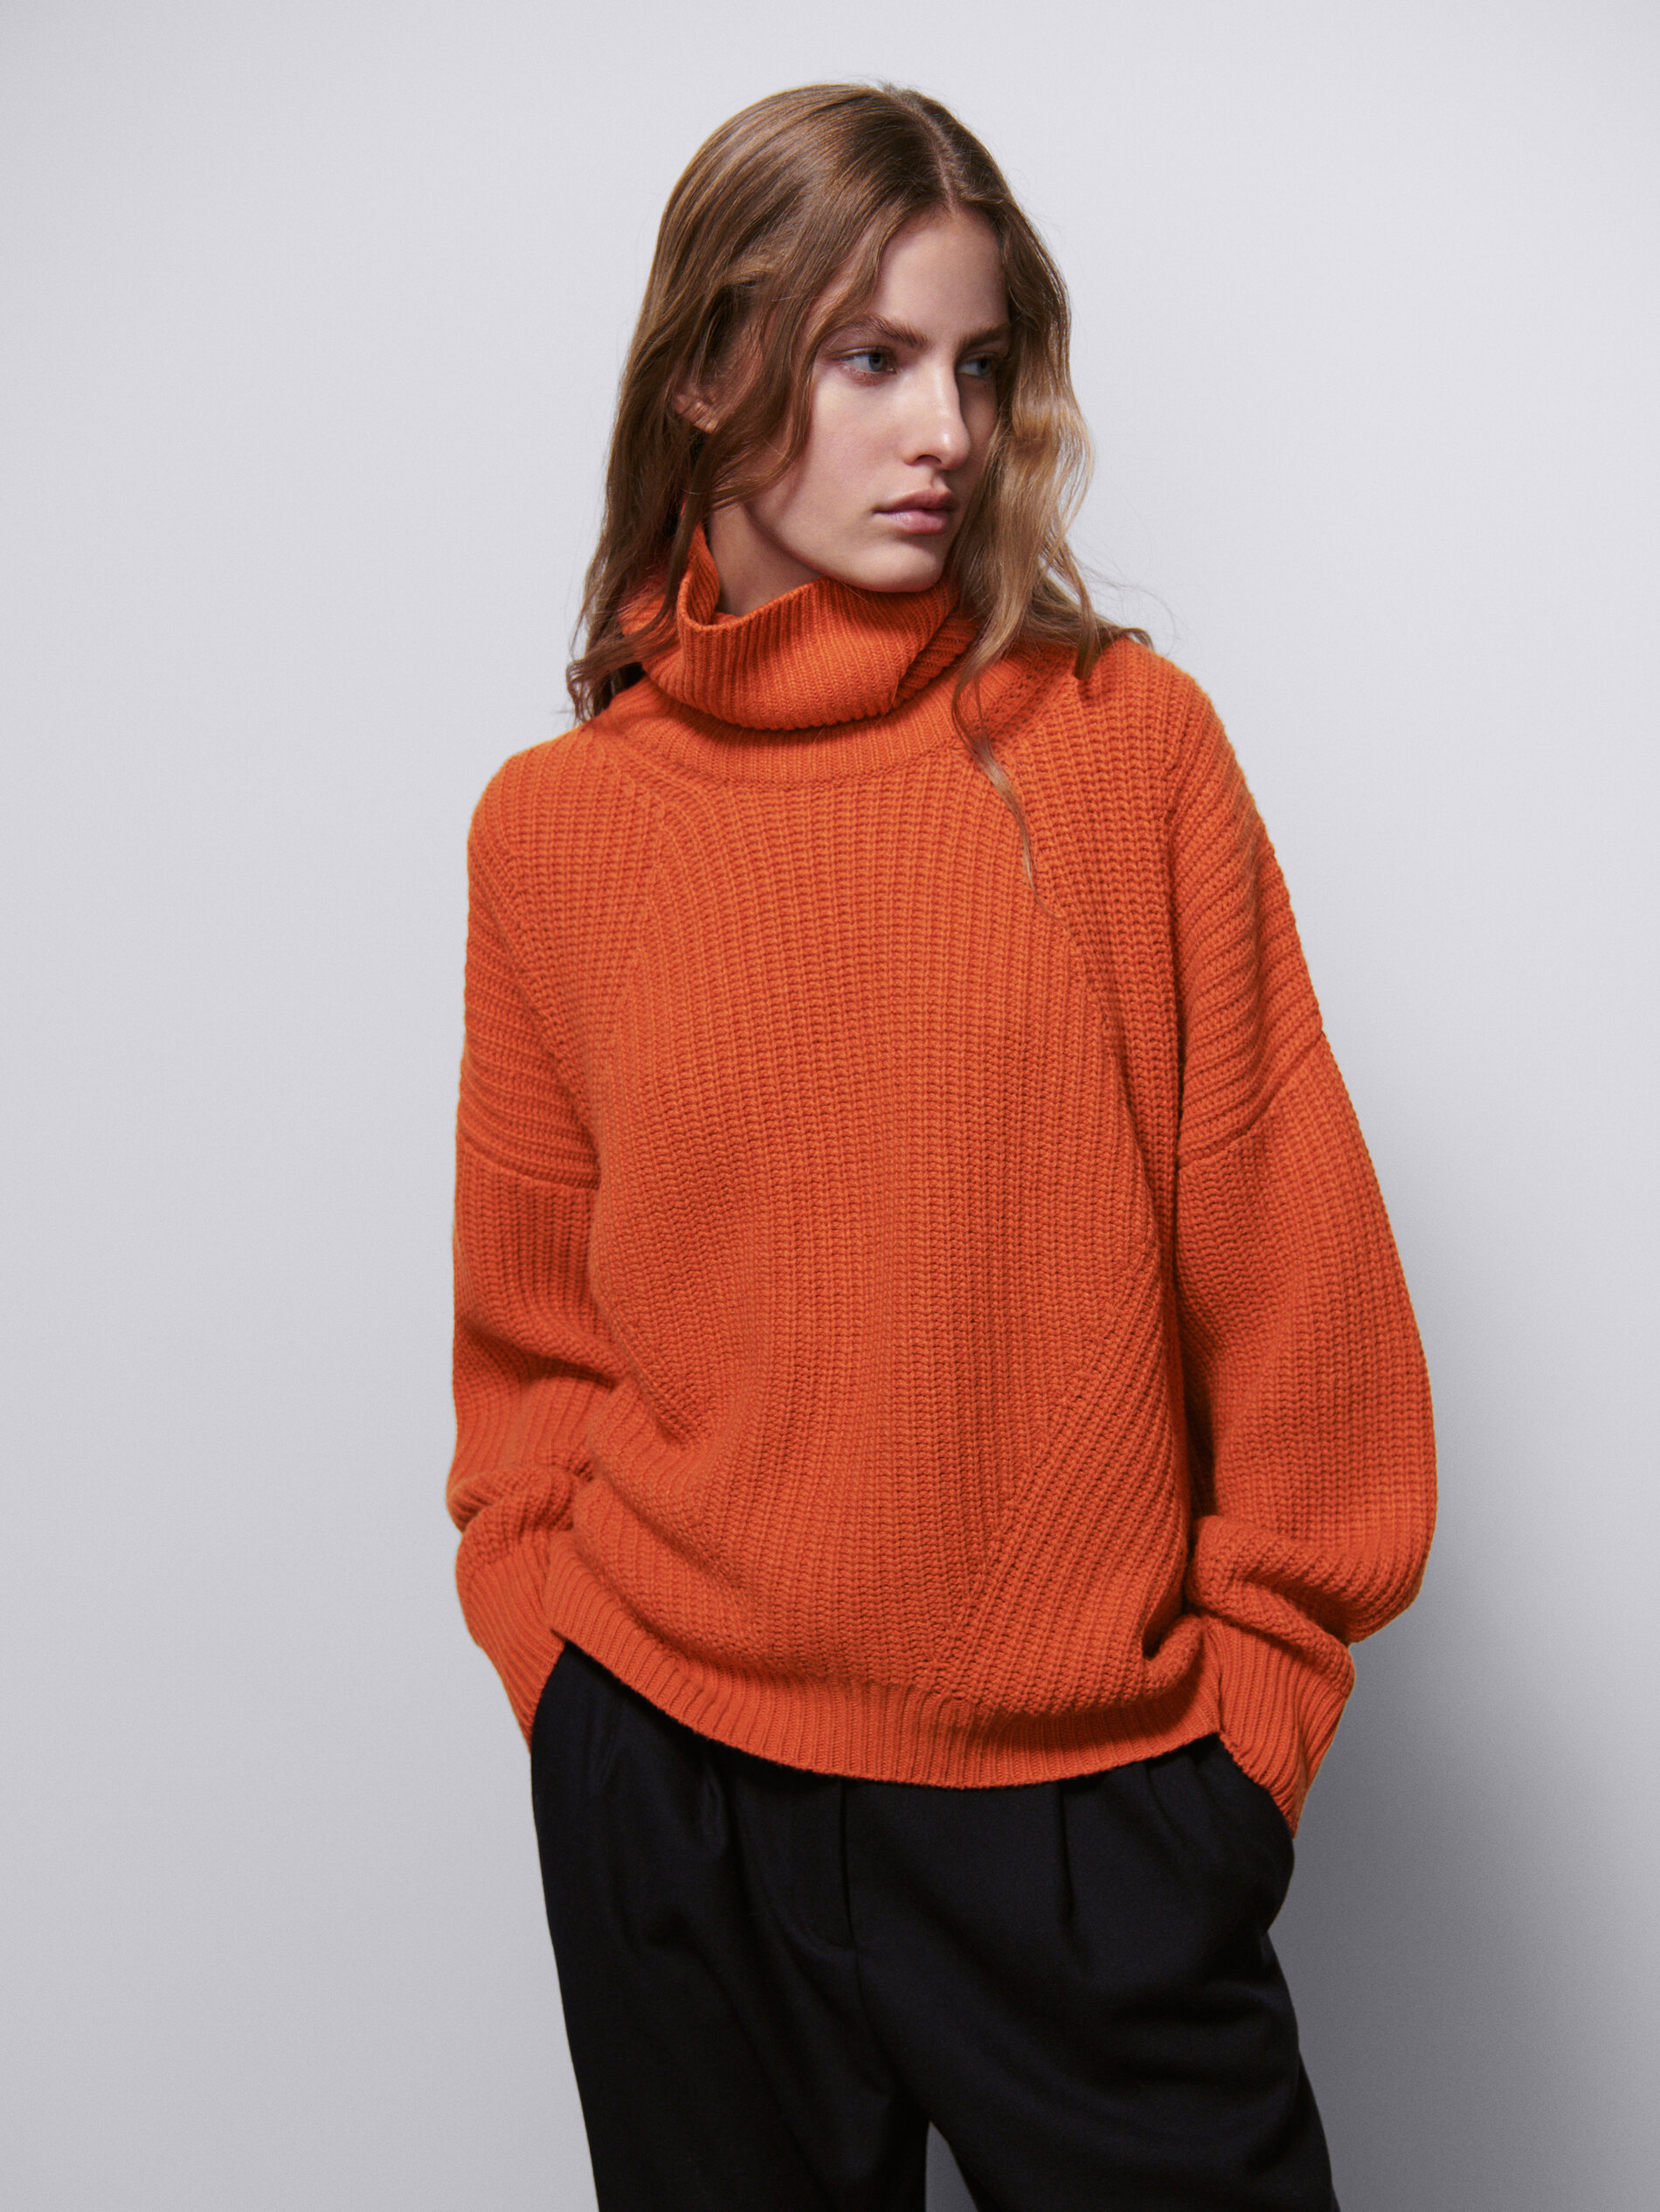 Purl knit wool and cashmere sweater